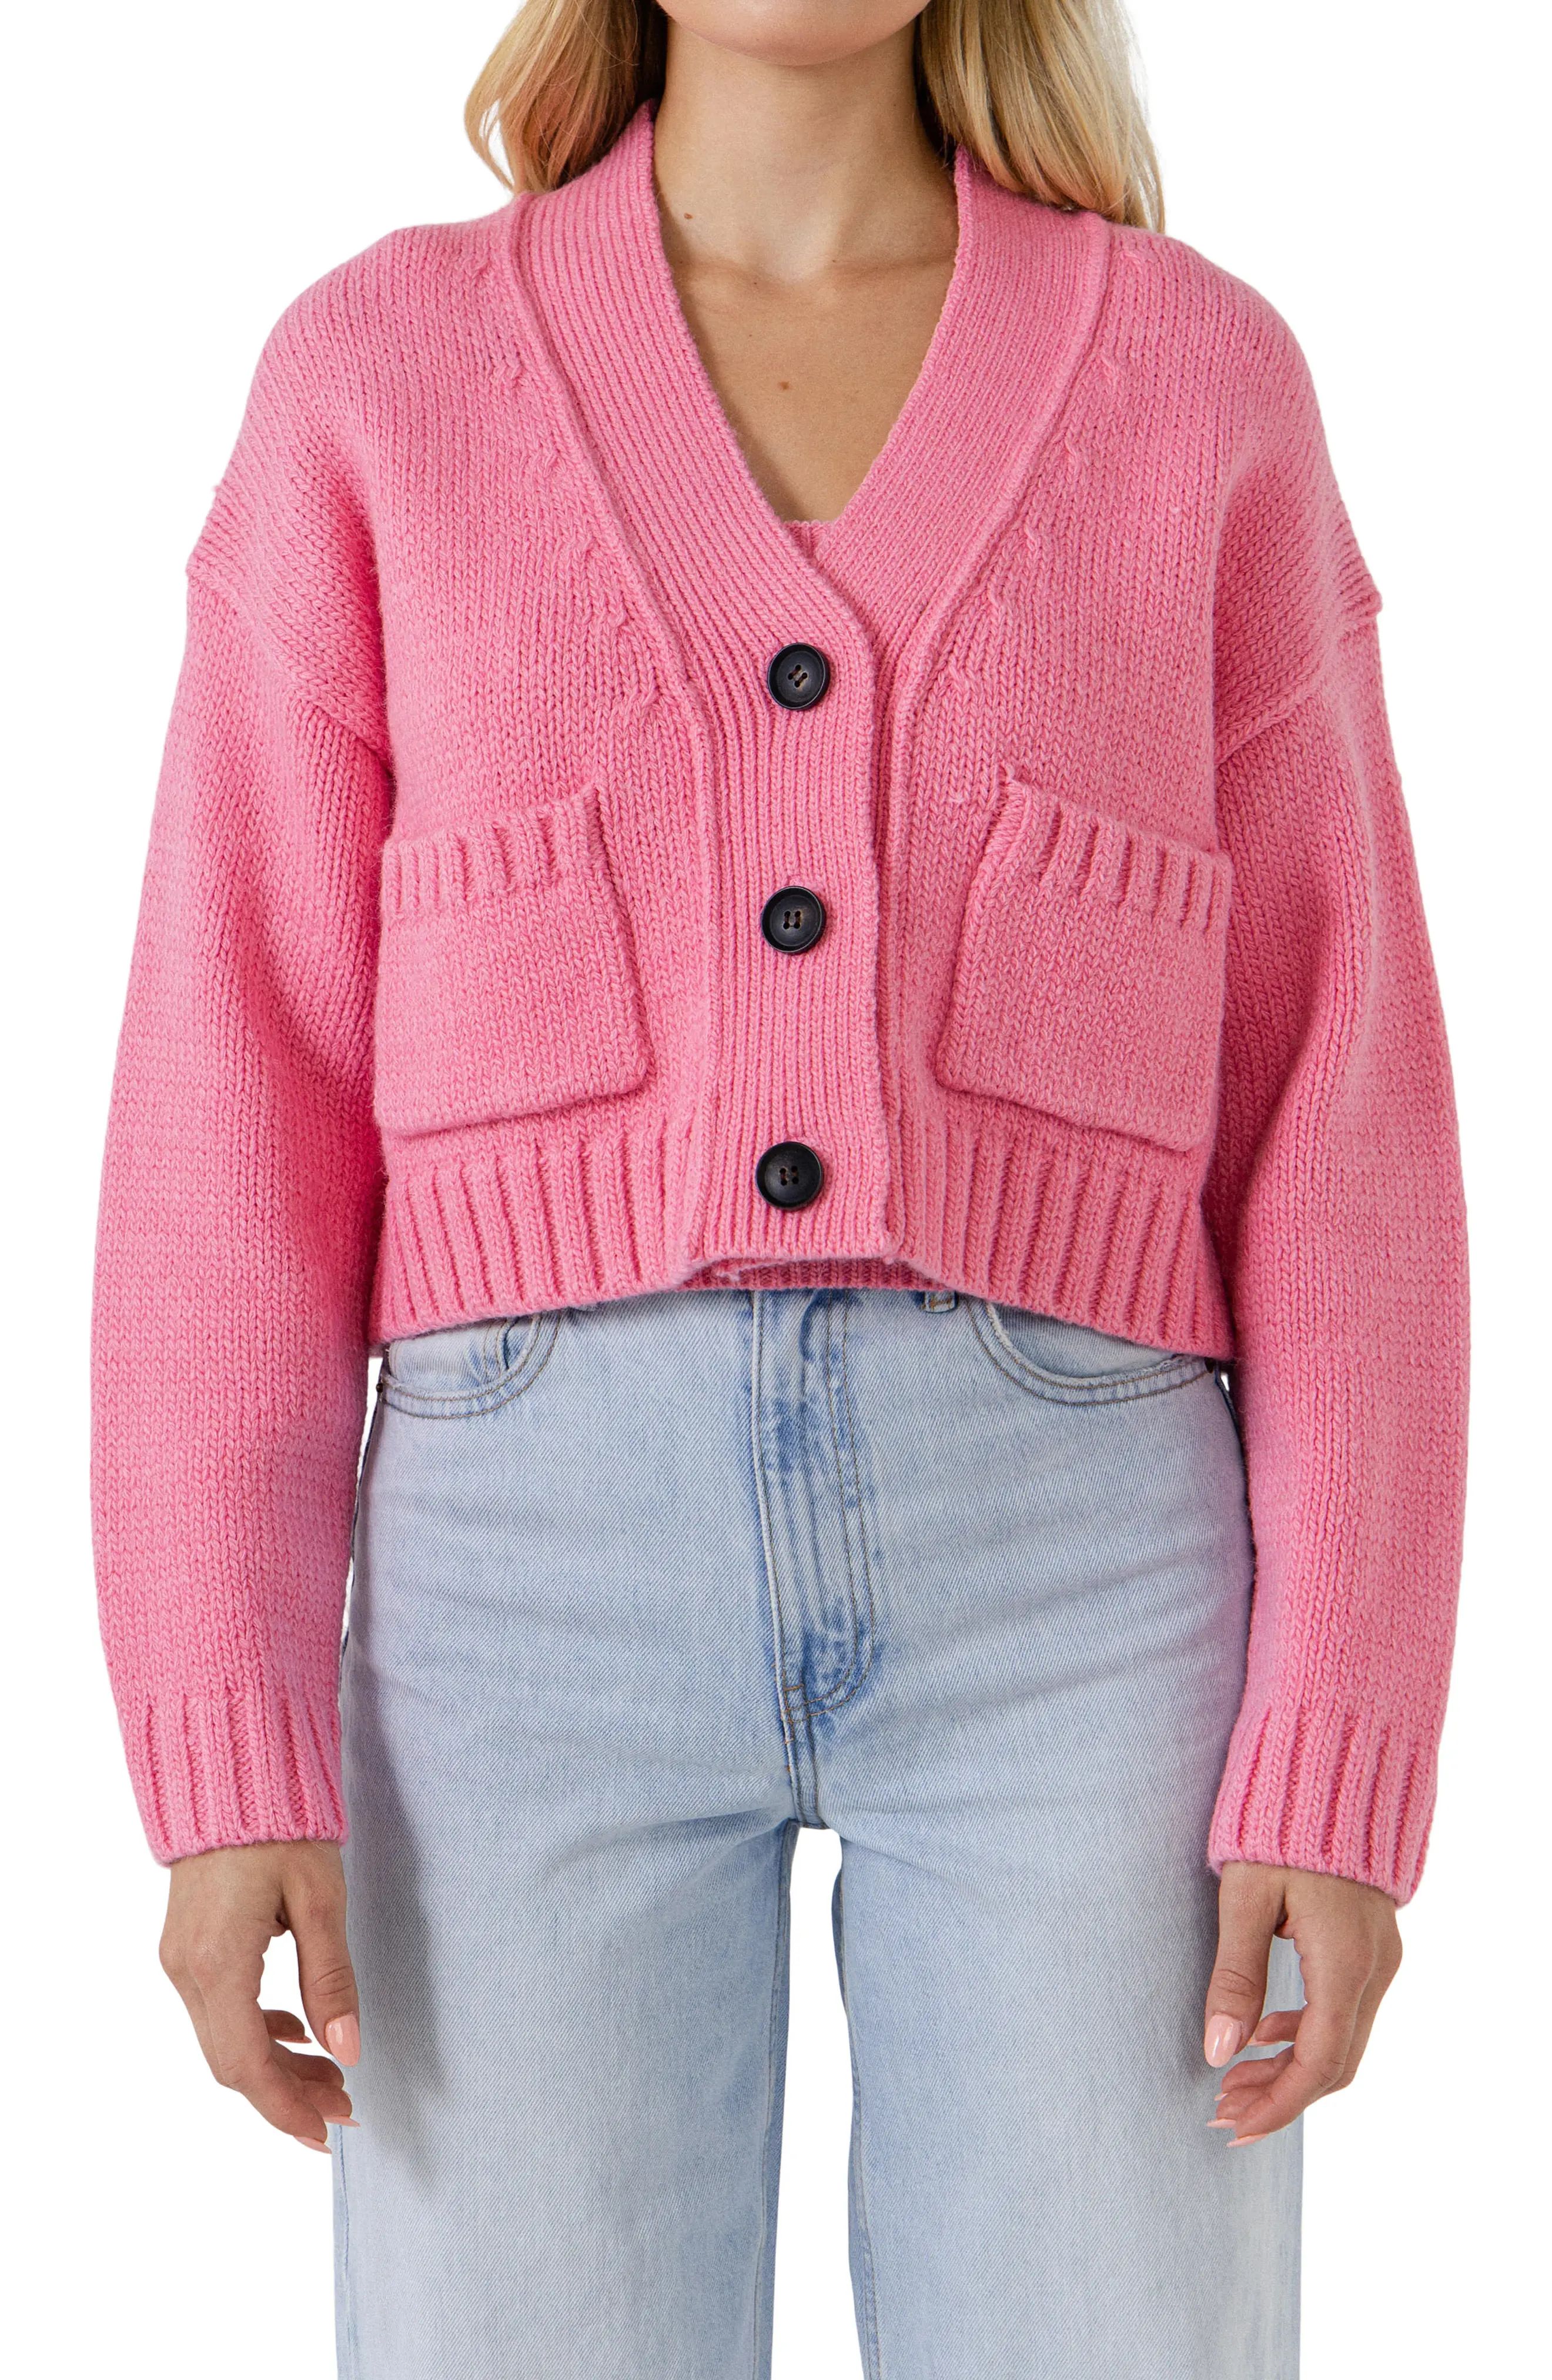 English Factory V-Neck Cardigan Sweater in Pink at Nordstrom, Size Medium | Nordstrom